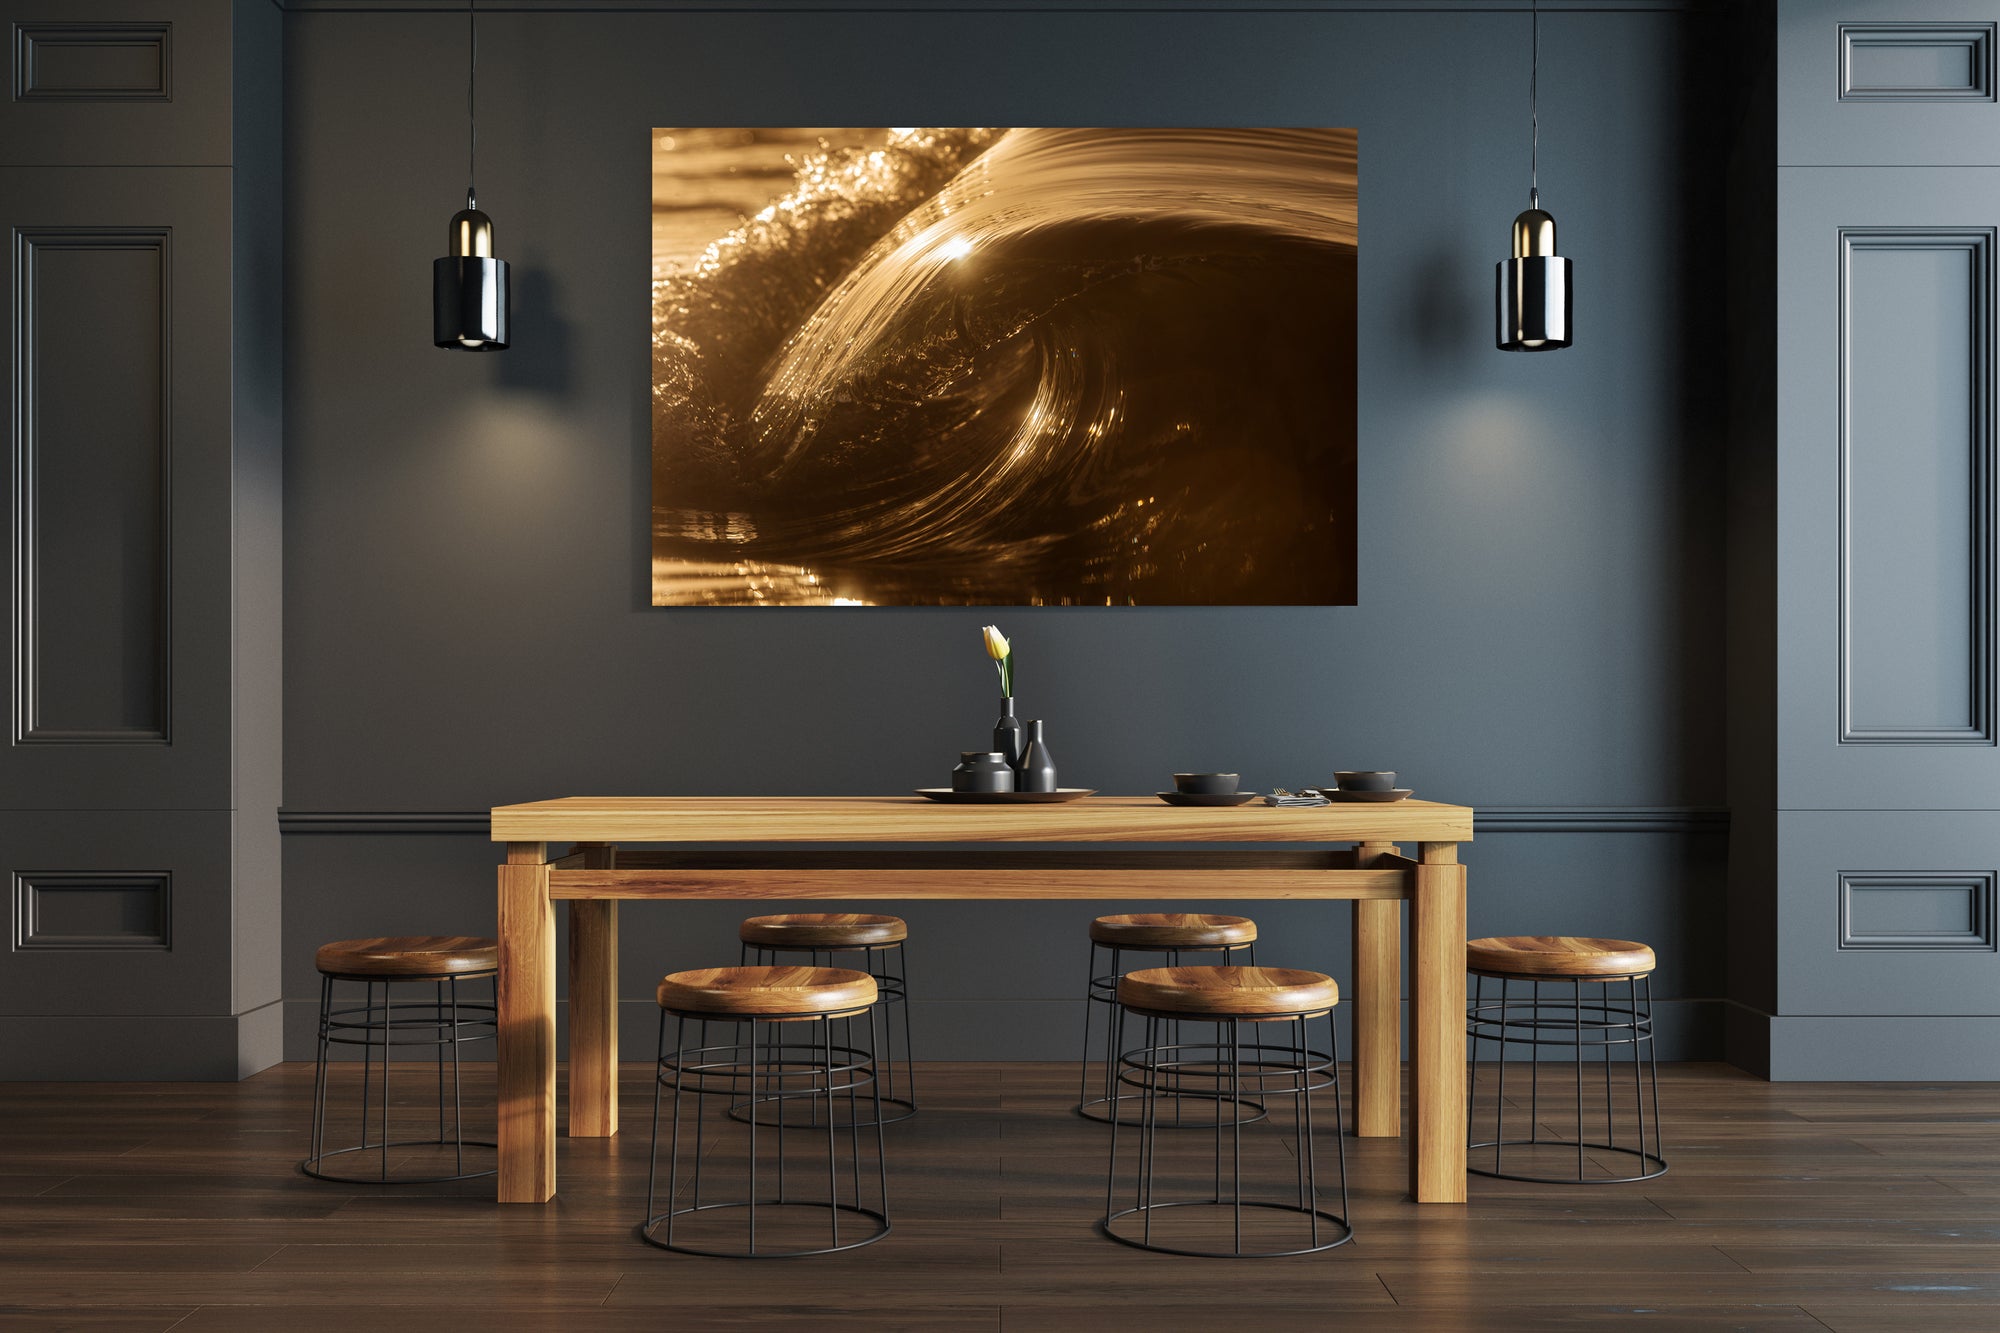 Shimmered Light Wave Photo and Wall Art